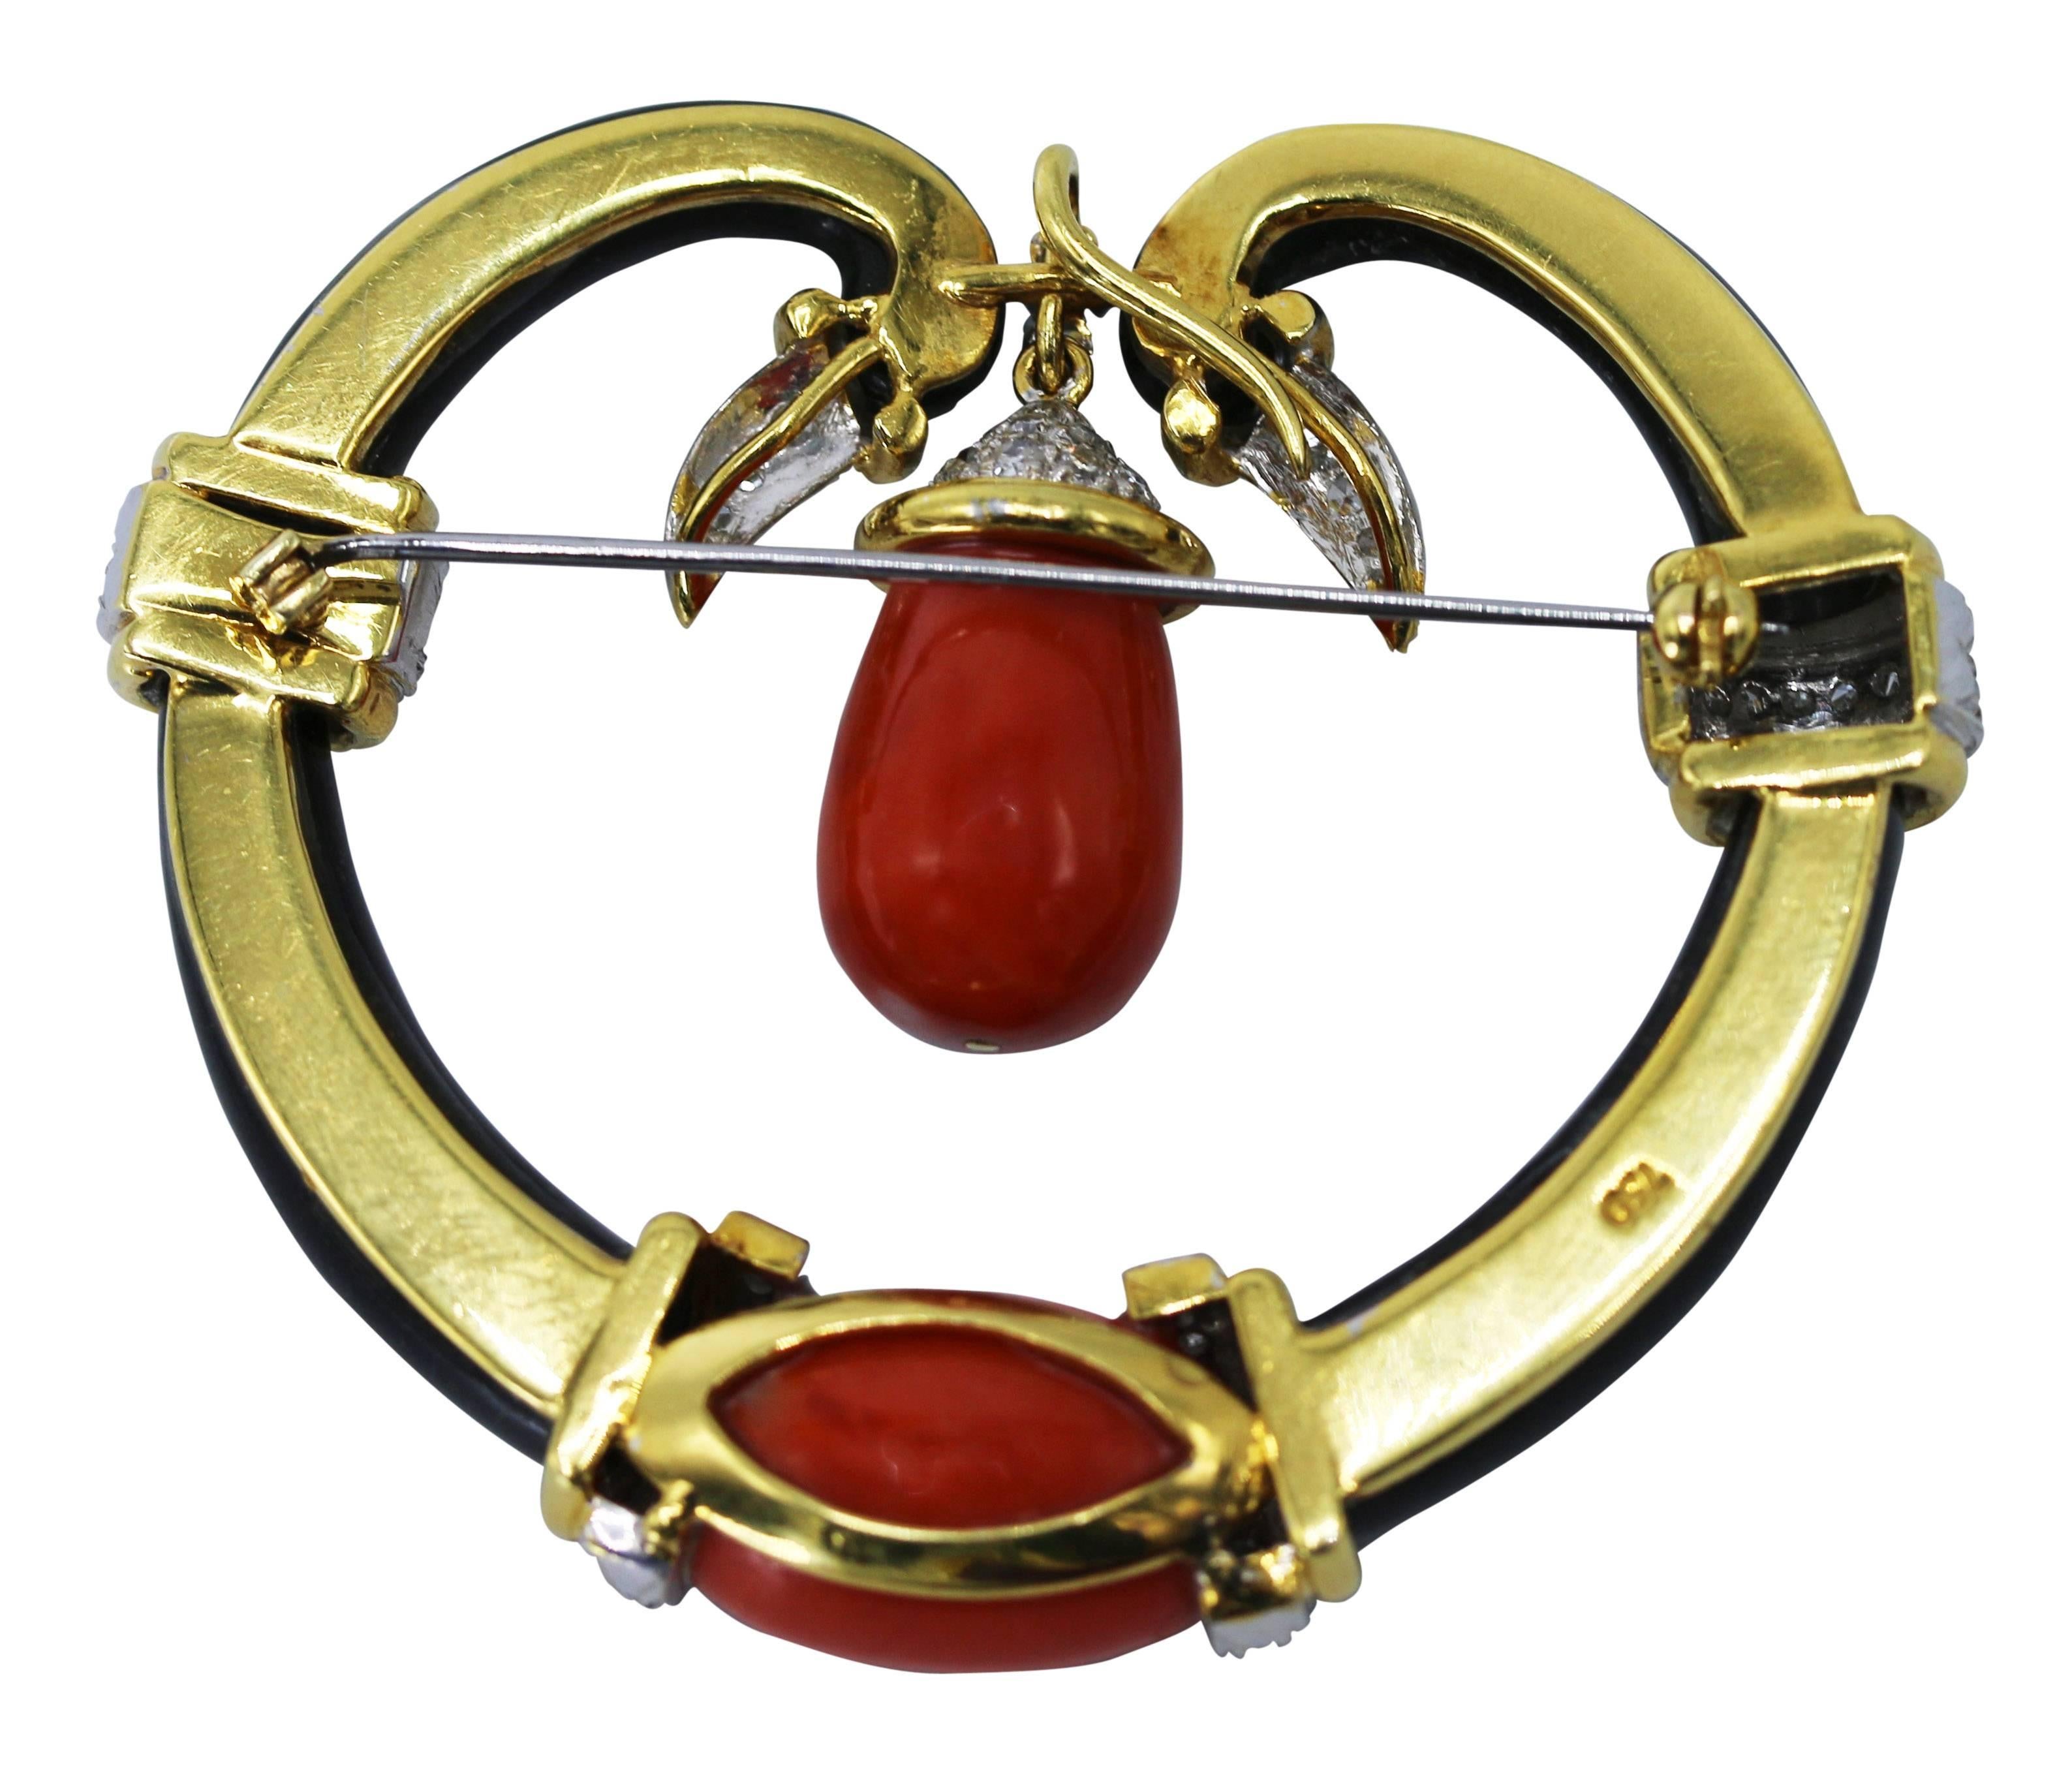 18 karat yellow gold, coral, onyx and diamond brooch, of openwork design composed of a carved onyx scroll accented by carved coral segments, set throughout with round and single-cut diamonds weighing approximately 1.40 carats, gross weight 41.3